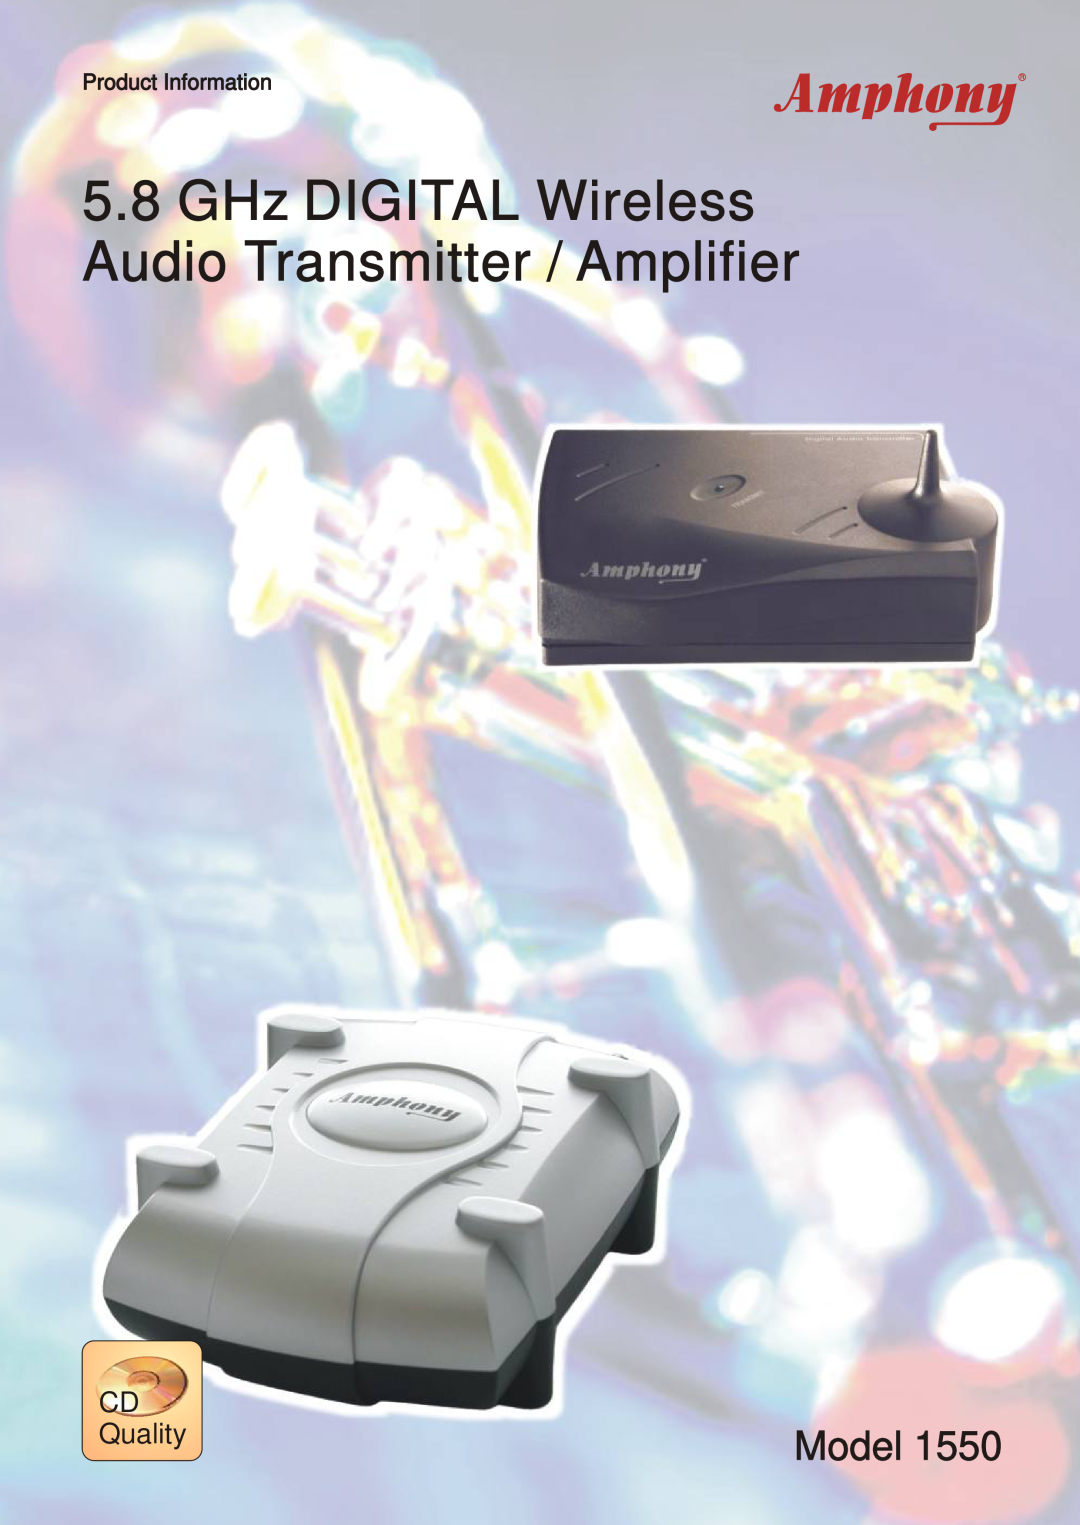 Amphony 1550 manual Frequently Asked Questions, GHz DIGITAL Wireless Audio Transmitter, Amplifier, Model 